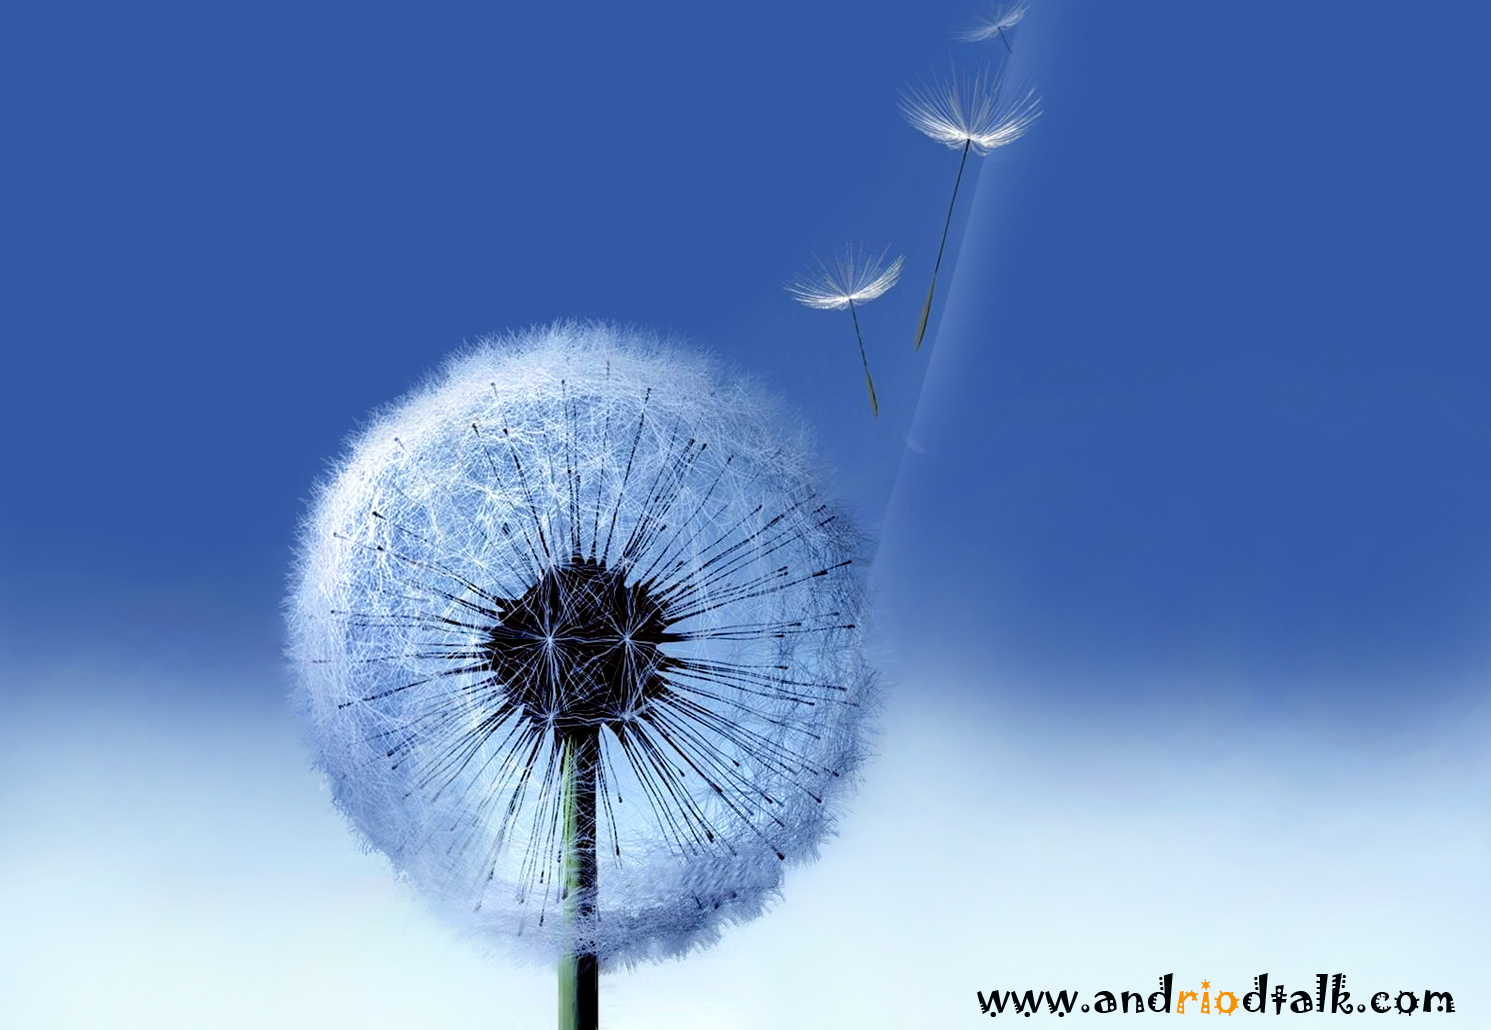 ... Dandelion live HD animated wallpaper android apk | Android Talkative